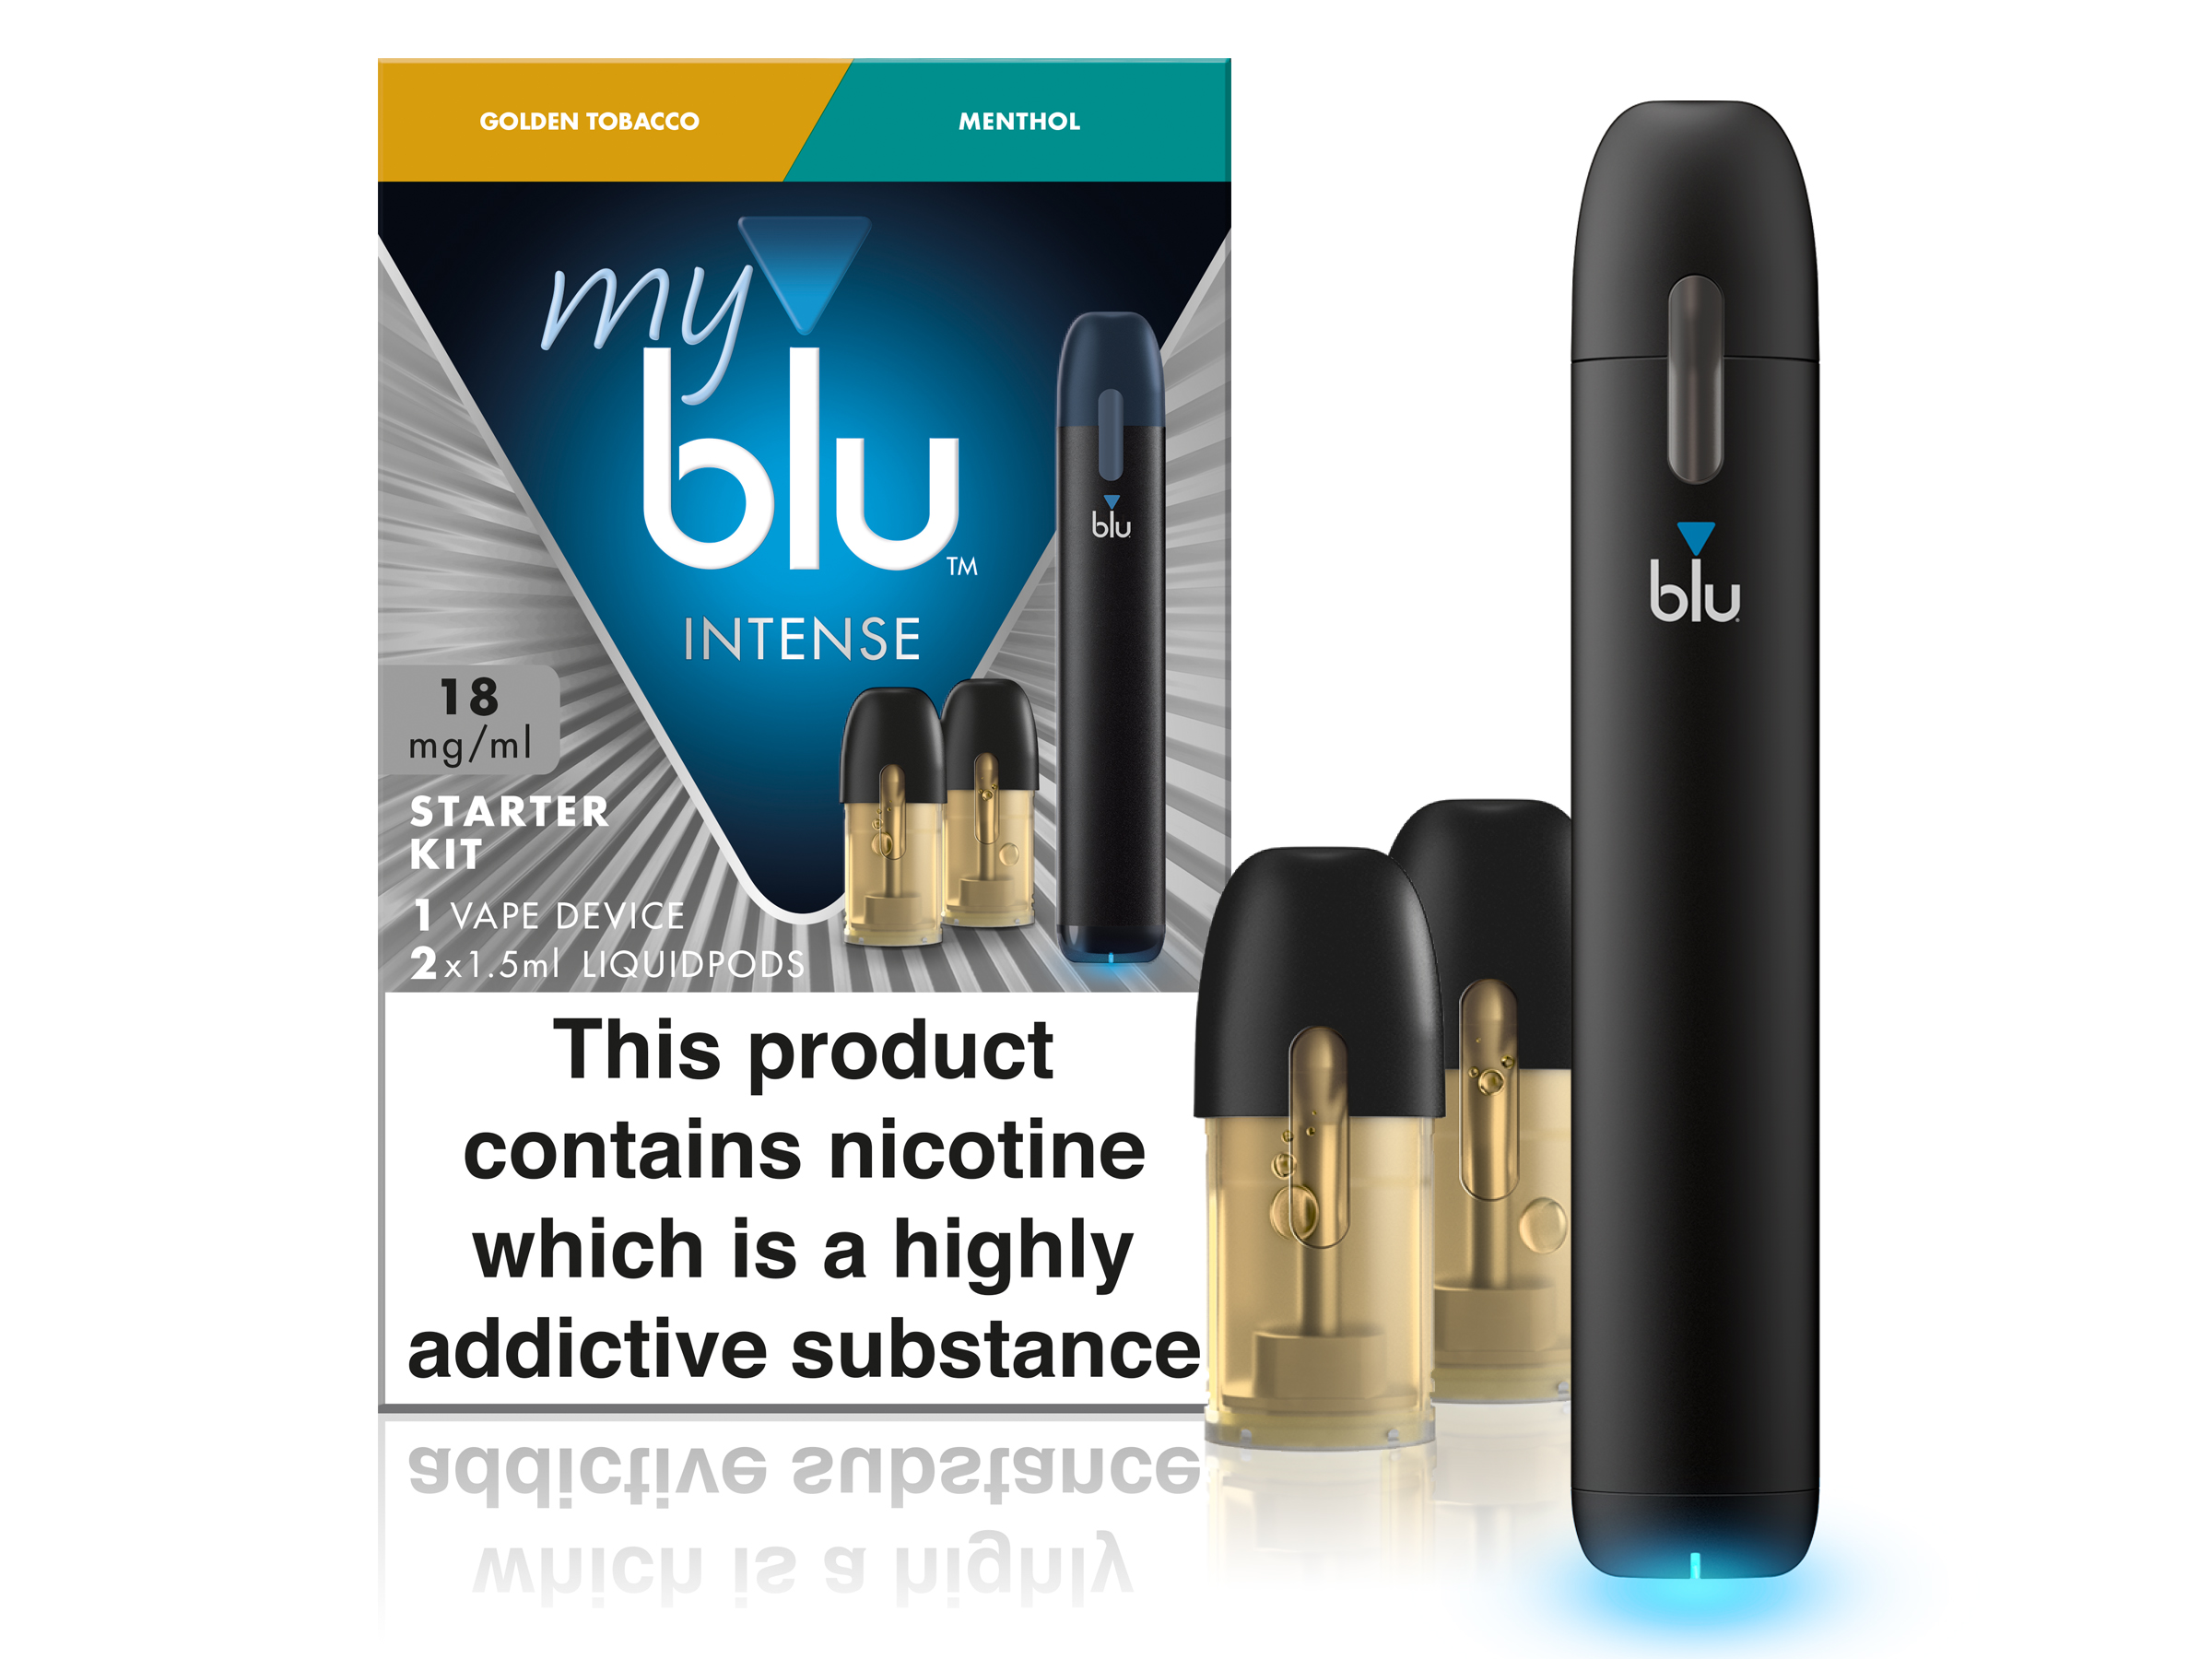 Imperial increases myblu appeal with latest packaging enhancements